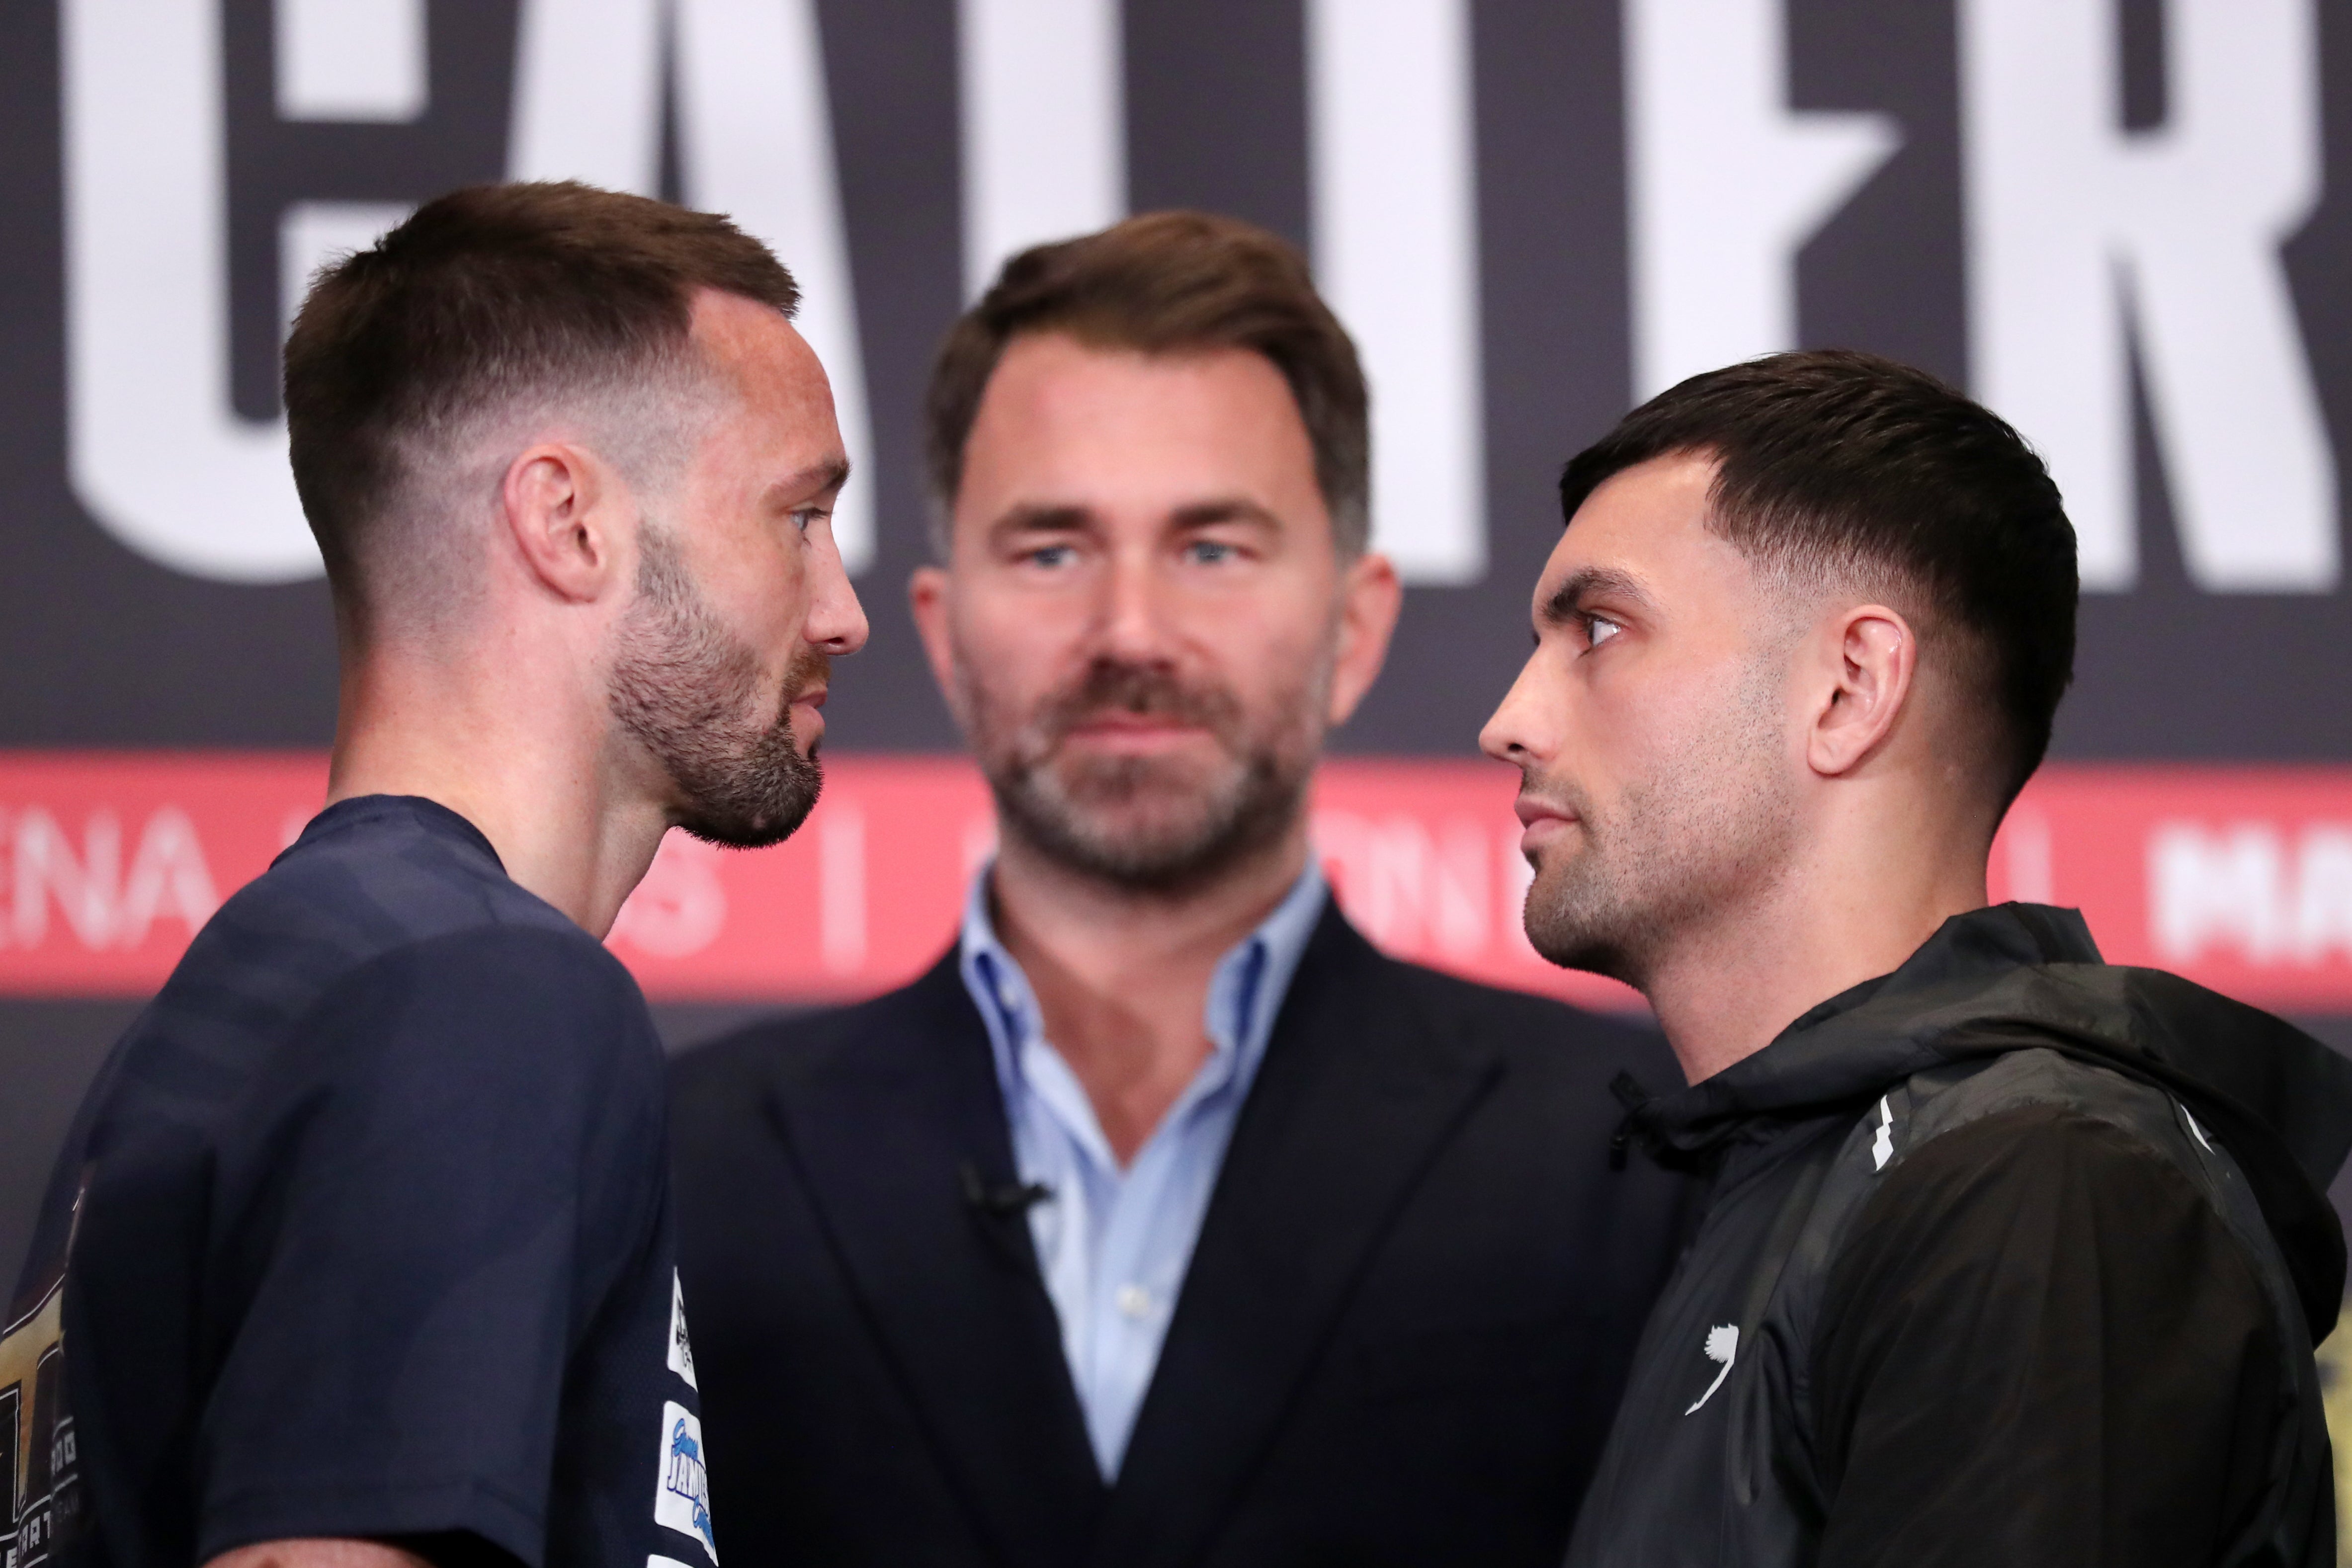 josh taylor, jack catterall, josh taylor promises ‘barnstormer’ rematch with jack catterall after initial ‘stinker’